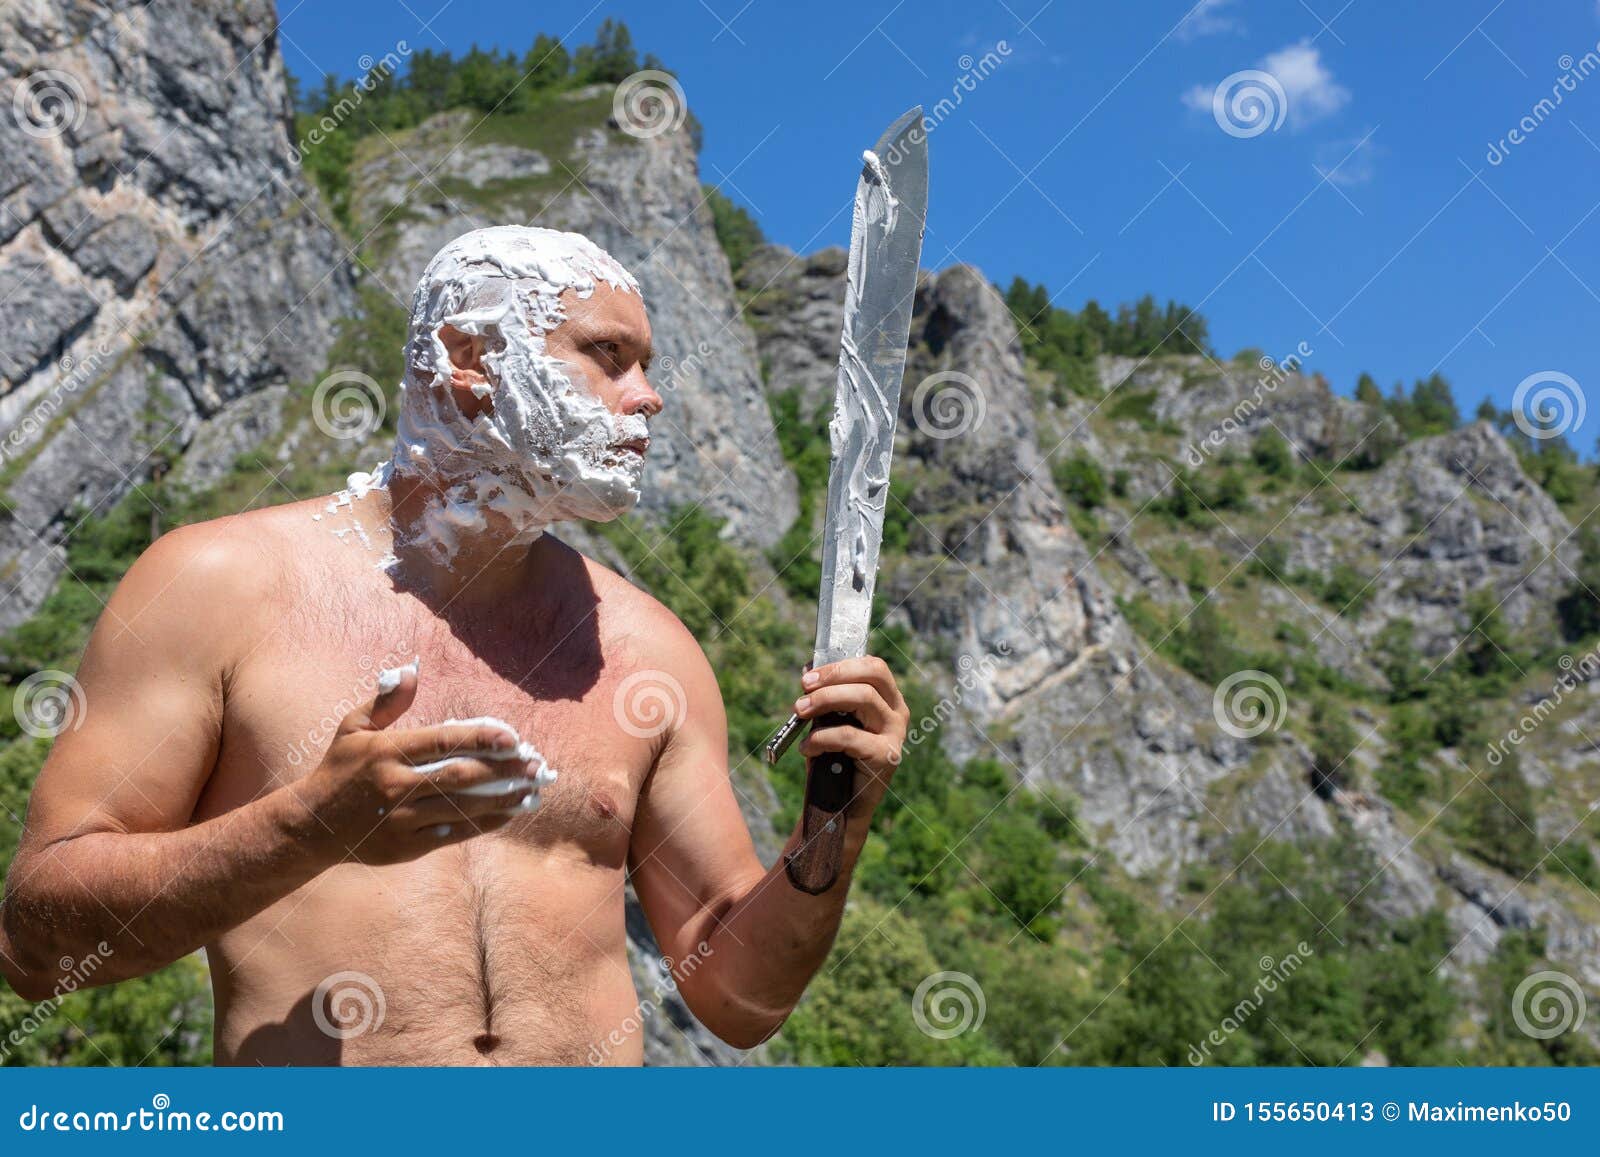 Brave Strong Man with Naked Shaves with Long Knives, Machetes in on a Hike, in Extreme Conditions Stock Image - Image of brutal, nature: 155650413